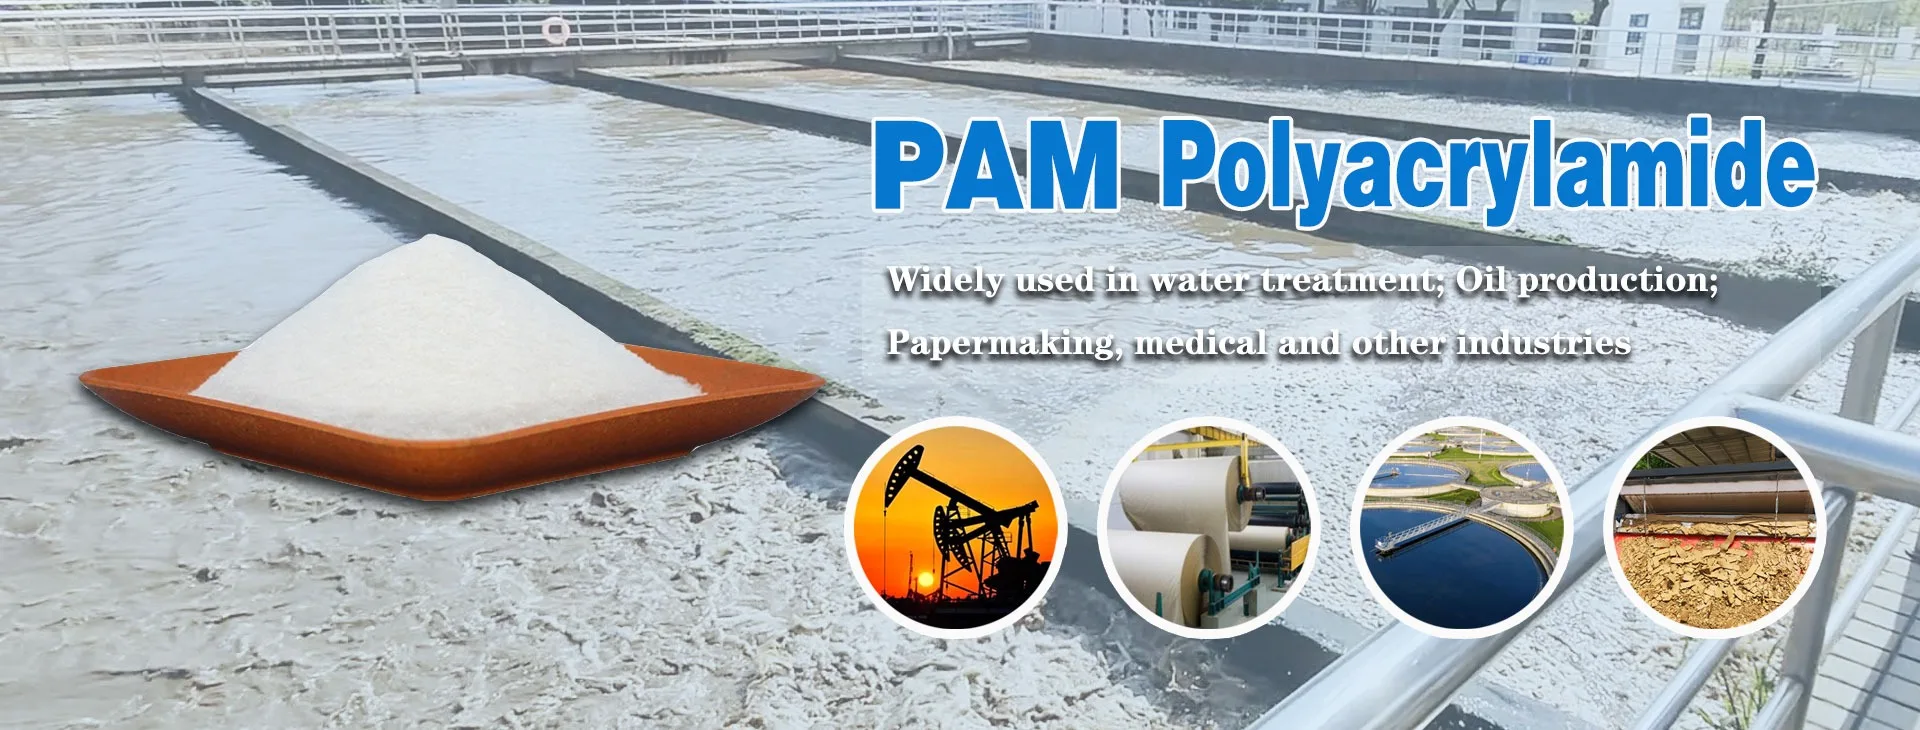 polyacrylamide PAM prices，flocculant